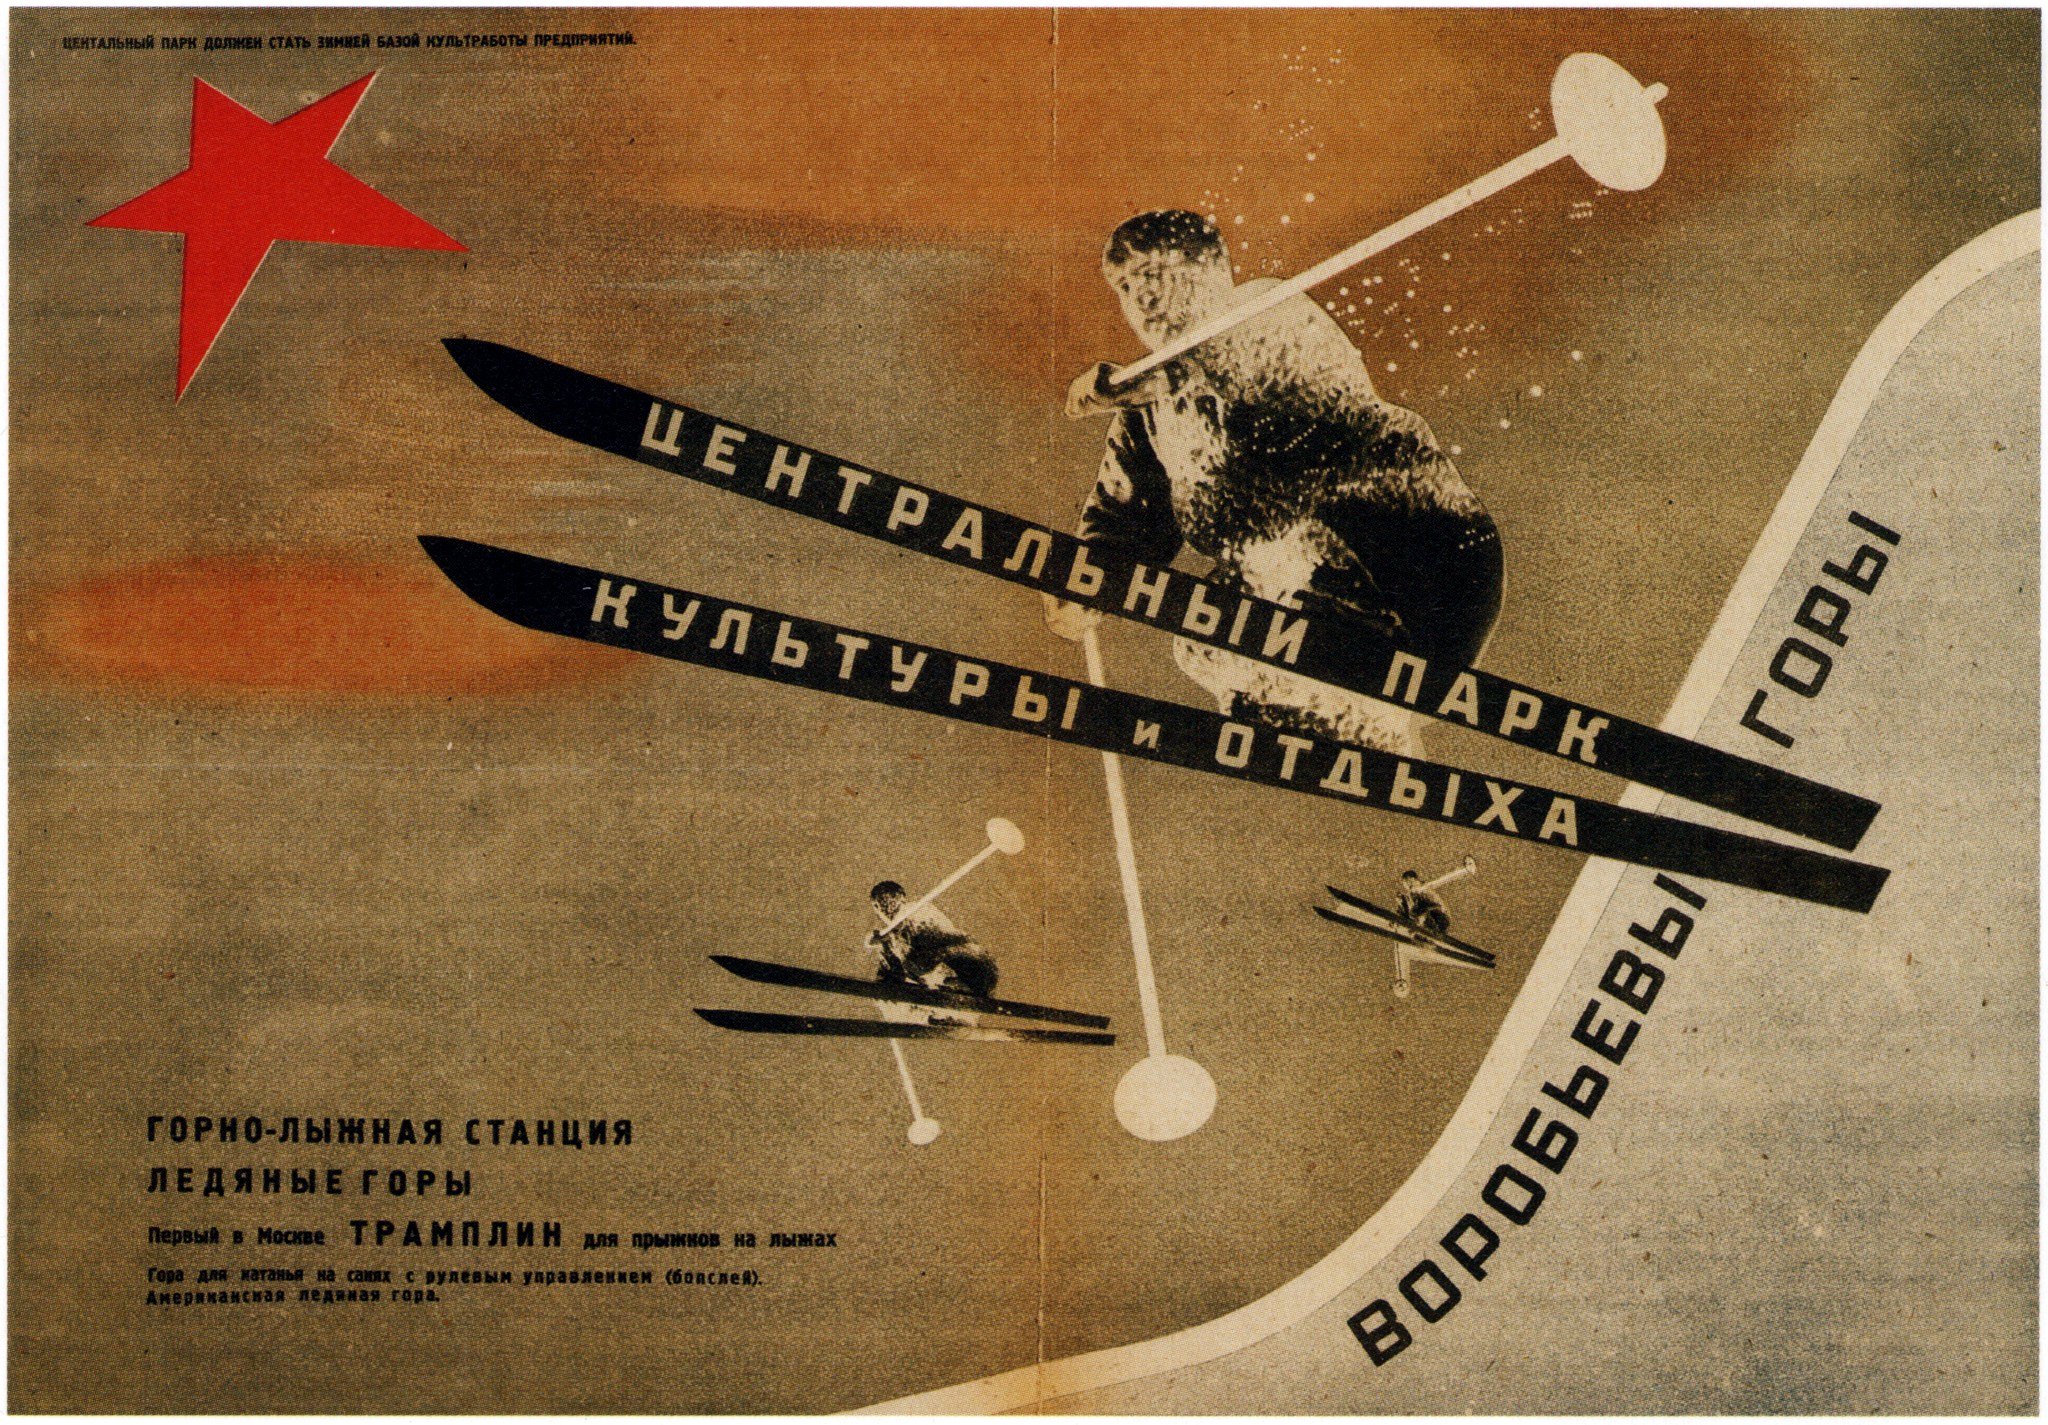 Gorky Central Park of Culture by El Lissitzky - 1931 - - private collection